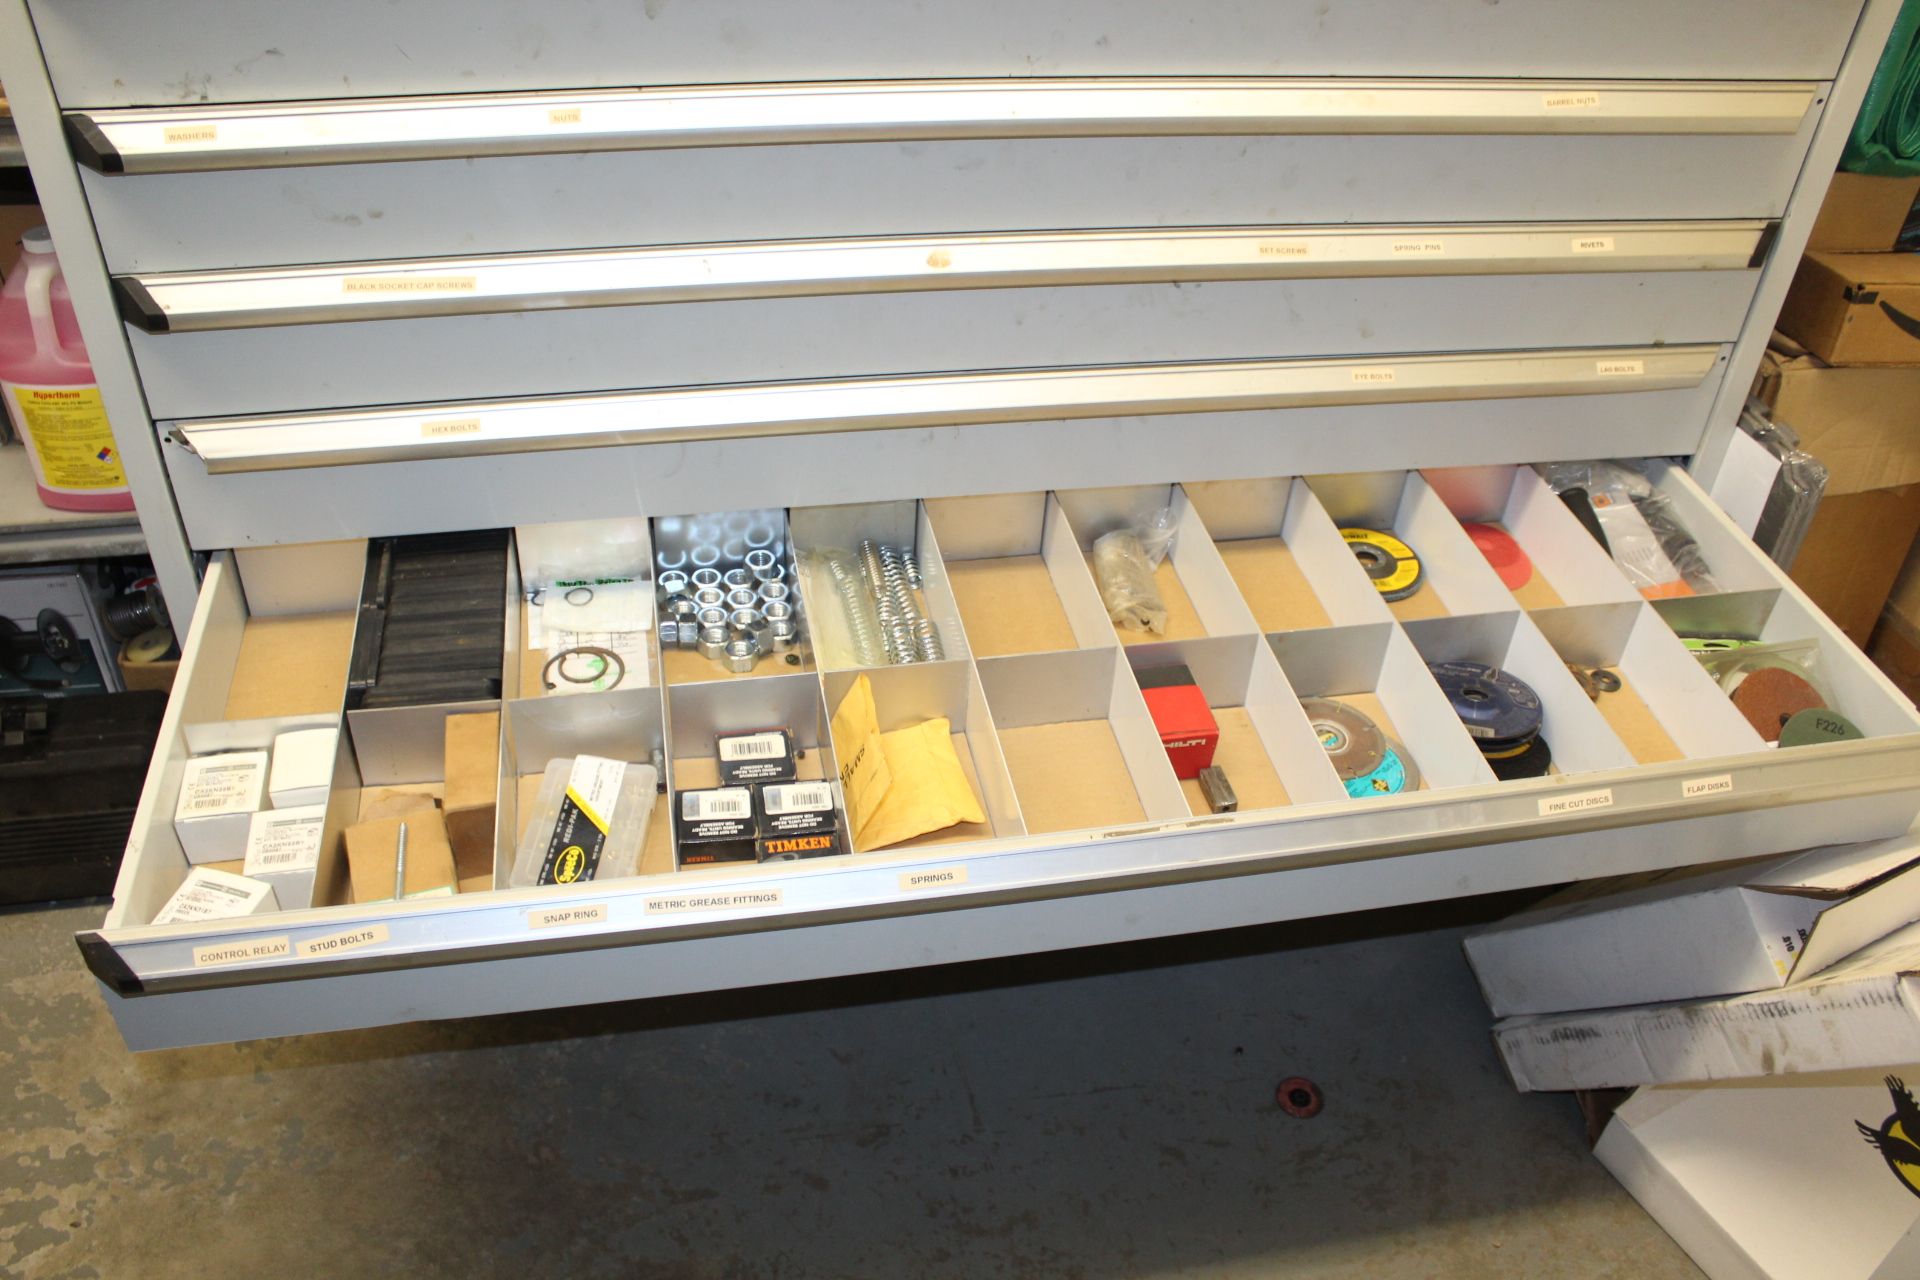 (3) Rousseau 8-Drawer Metal Cabinets on Casters, Sold with Contents As Shown - Image 21 of 23